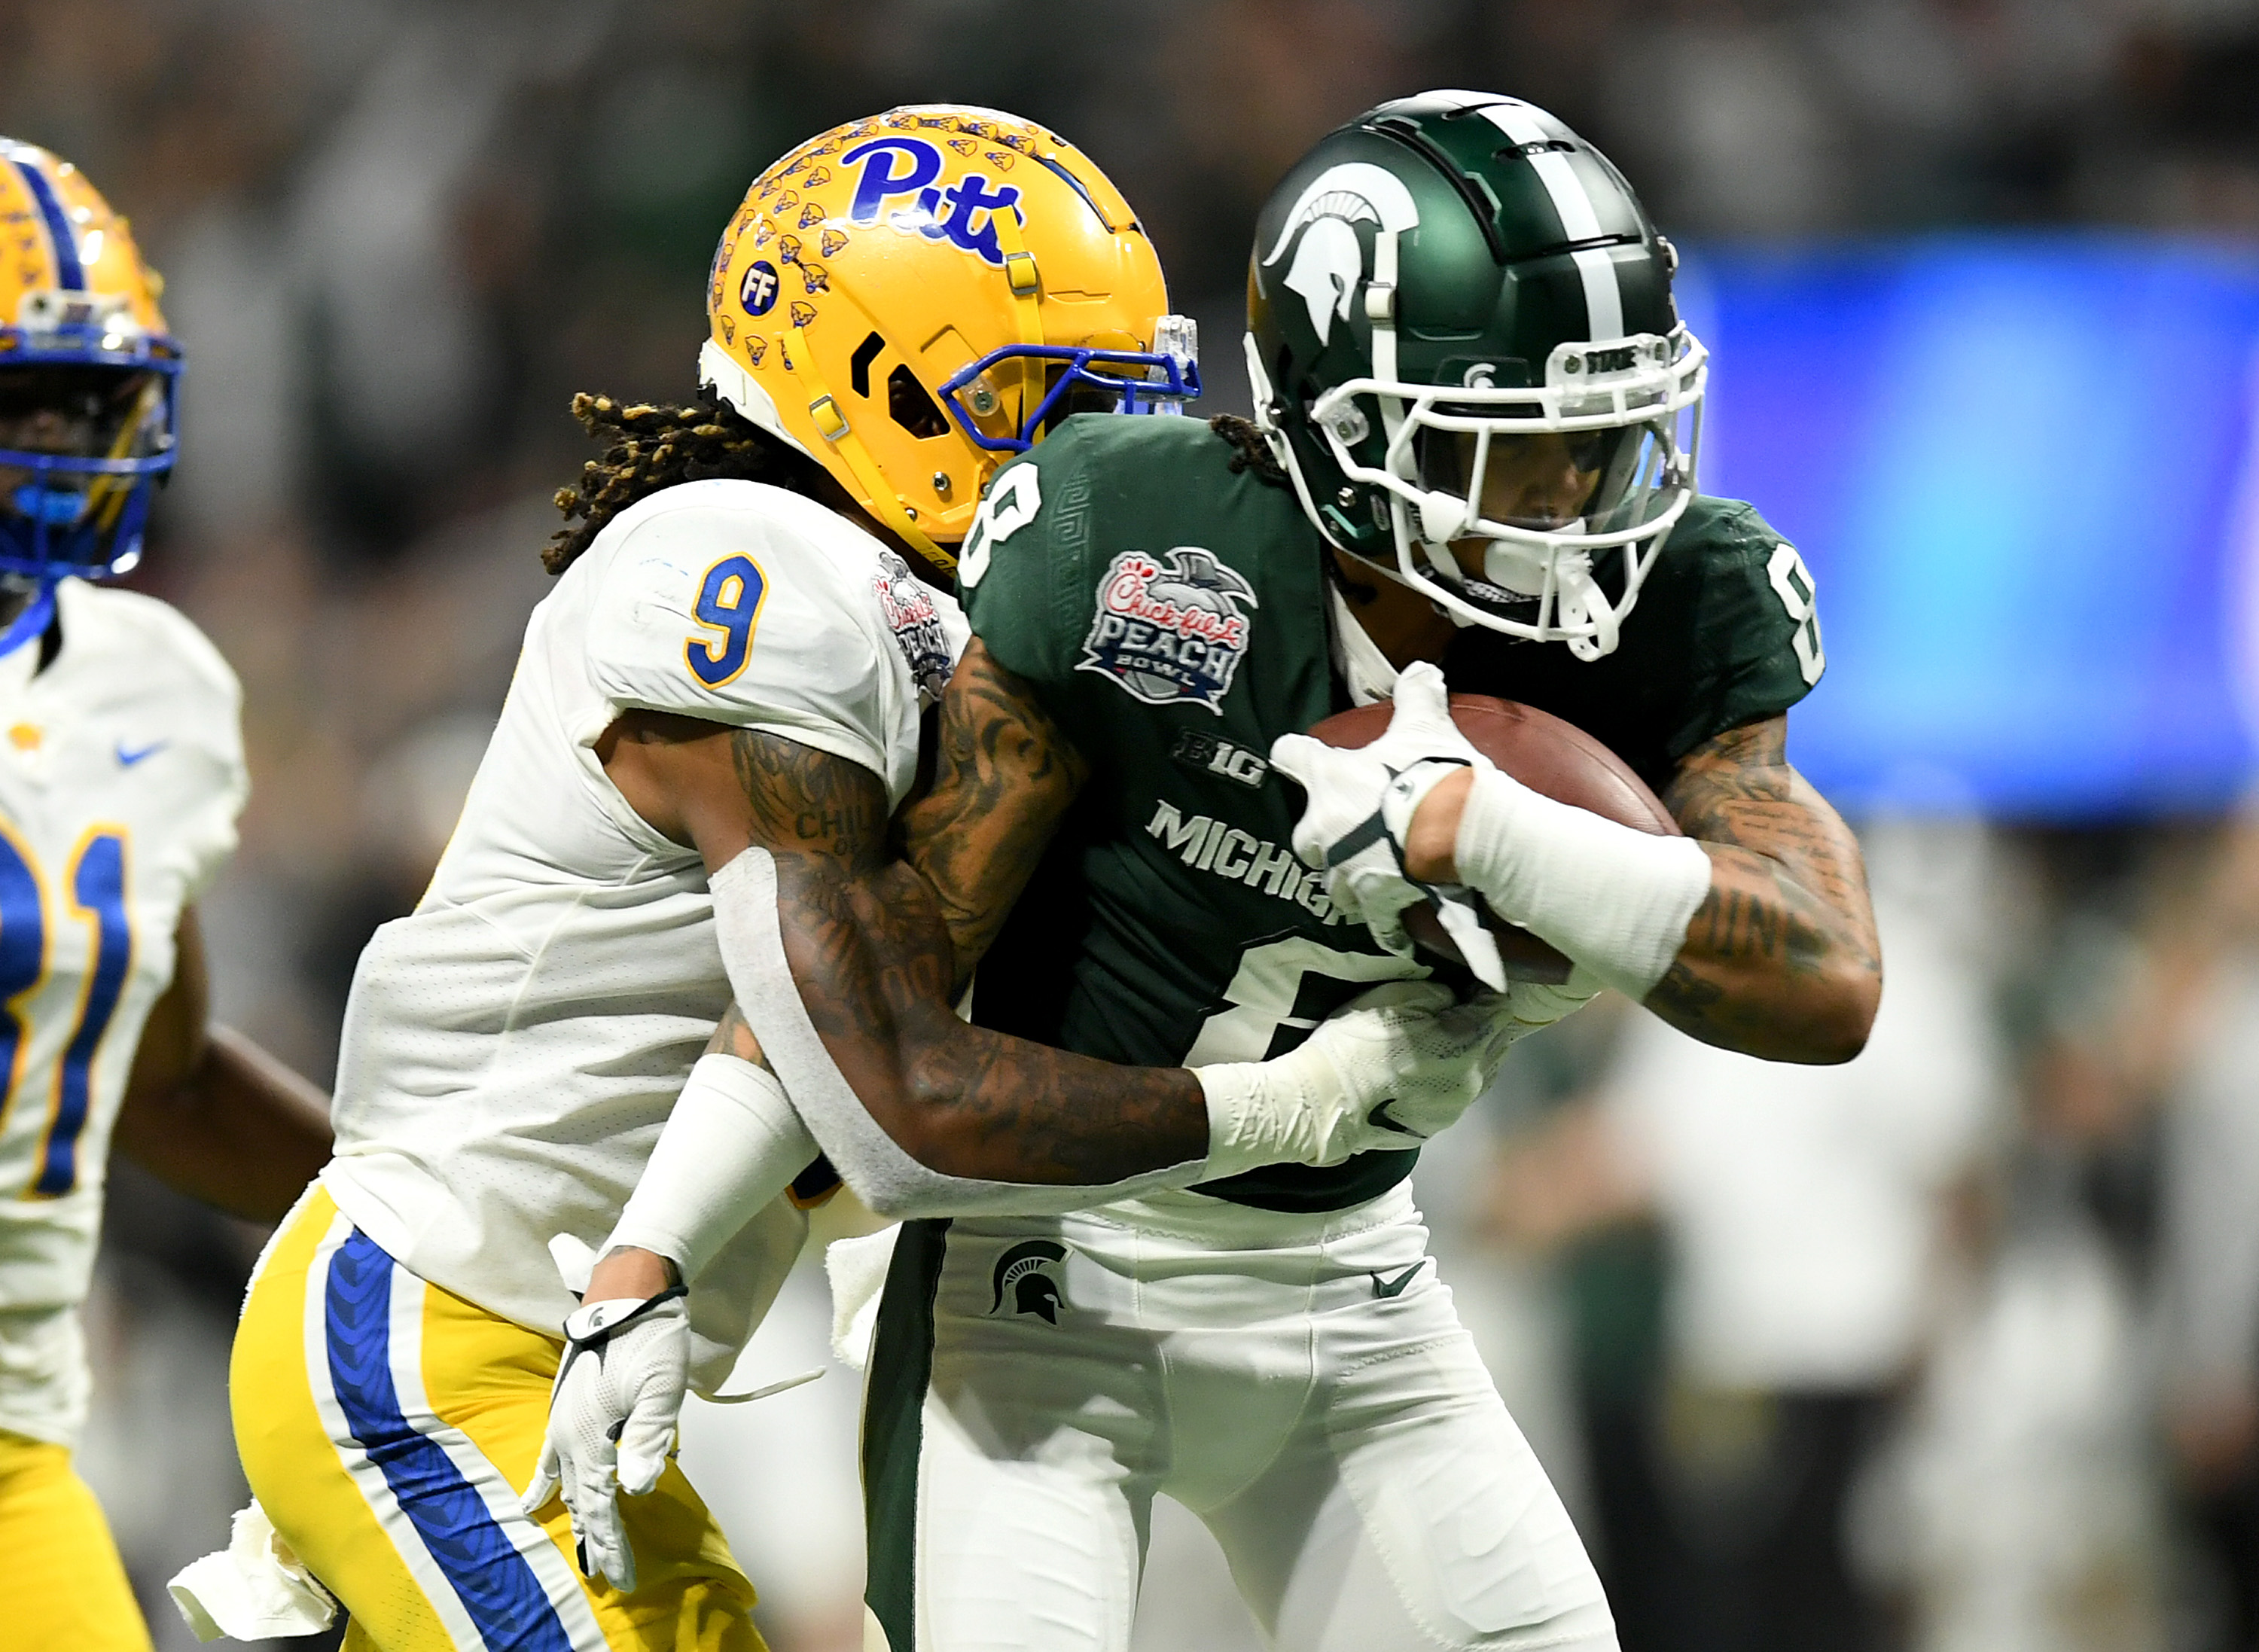 Michigan State Football Schedule 2022 Printable Here Is Michigan State Football's New 2022 Schedule, With Michigan Game In  Ann Arbor